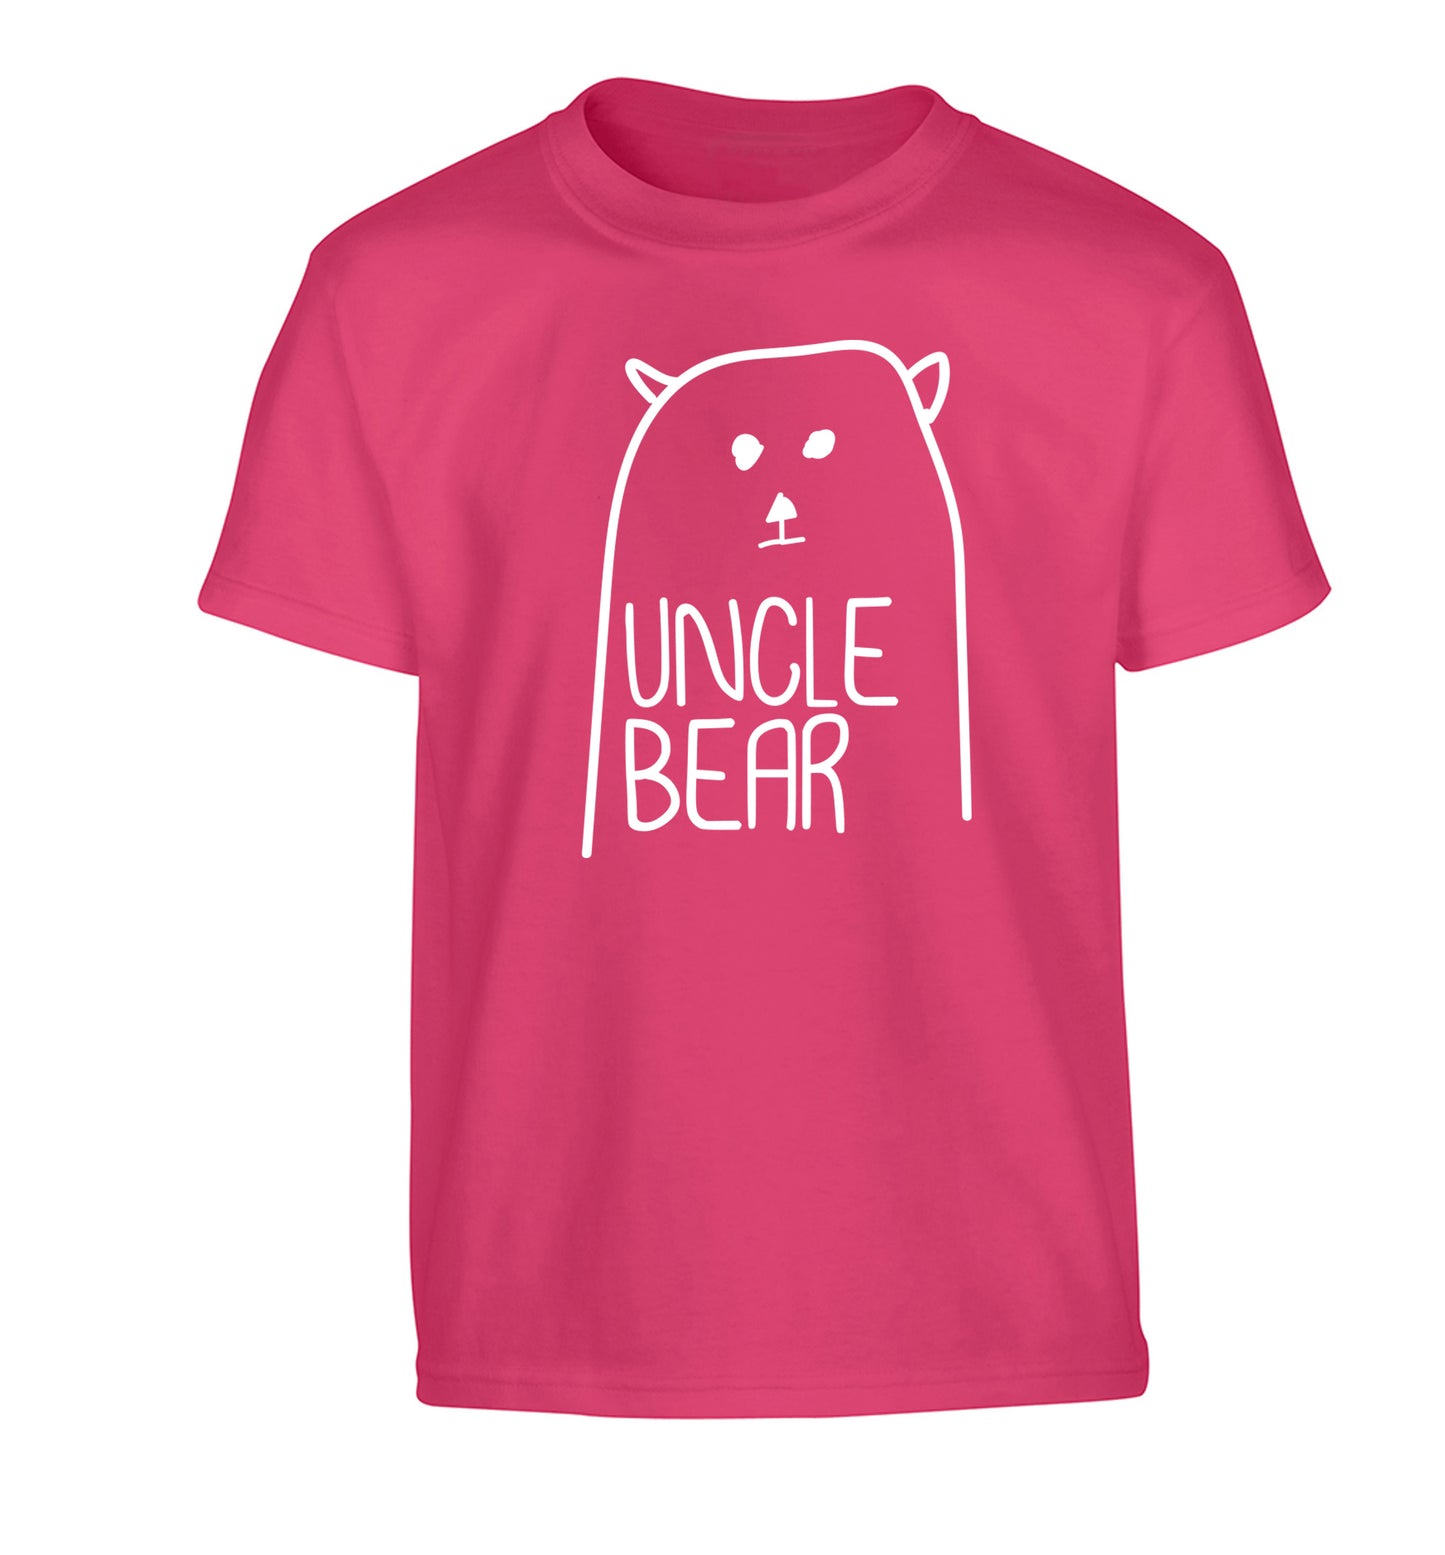 Uncle bear Children's pink Tshirt 12-13 Years